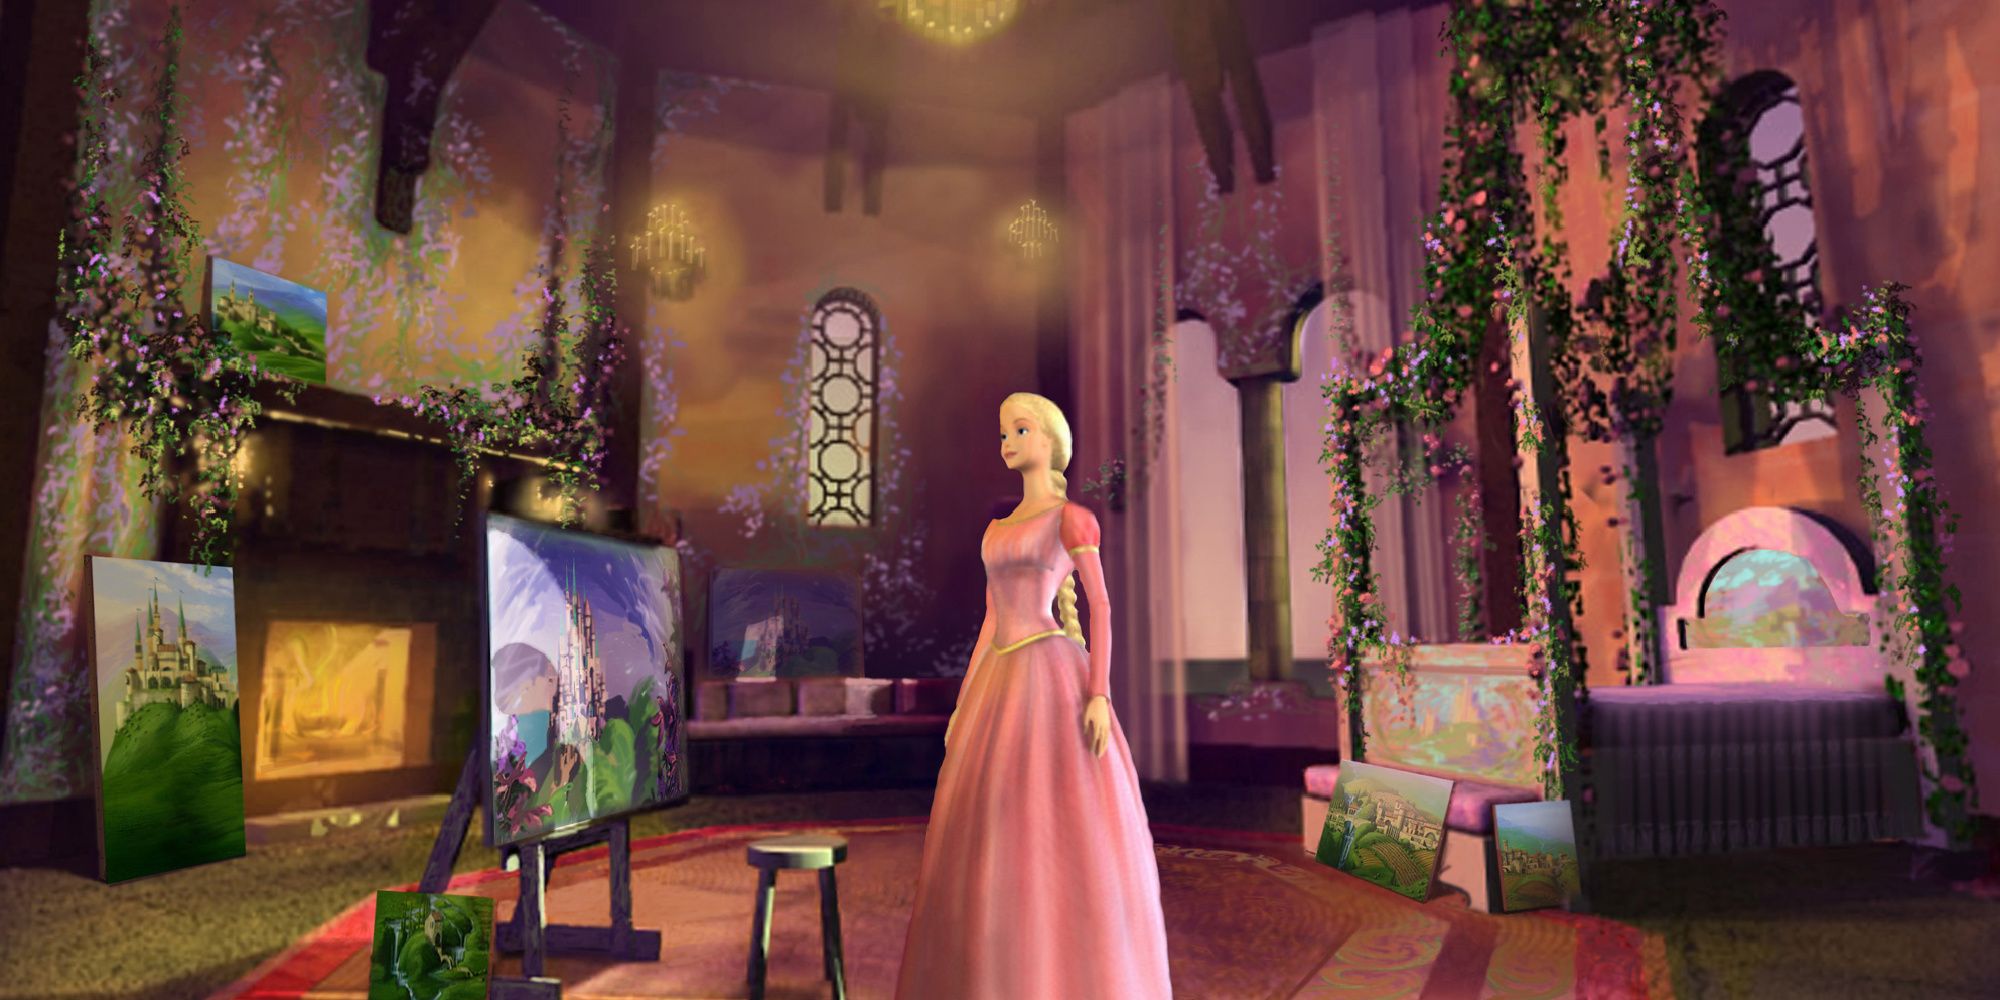 Barbie as Rapunzel in her tower with her paintings